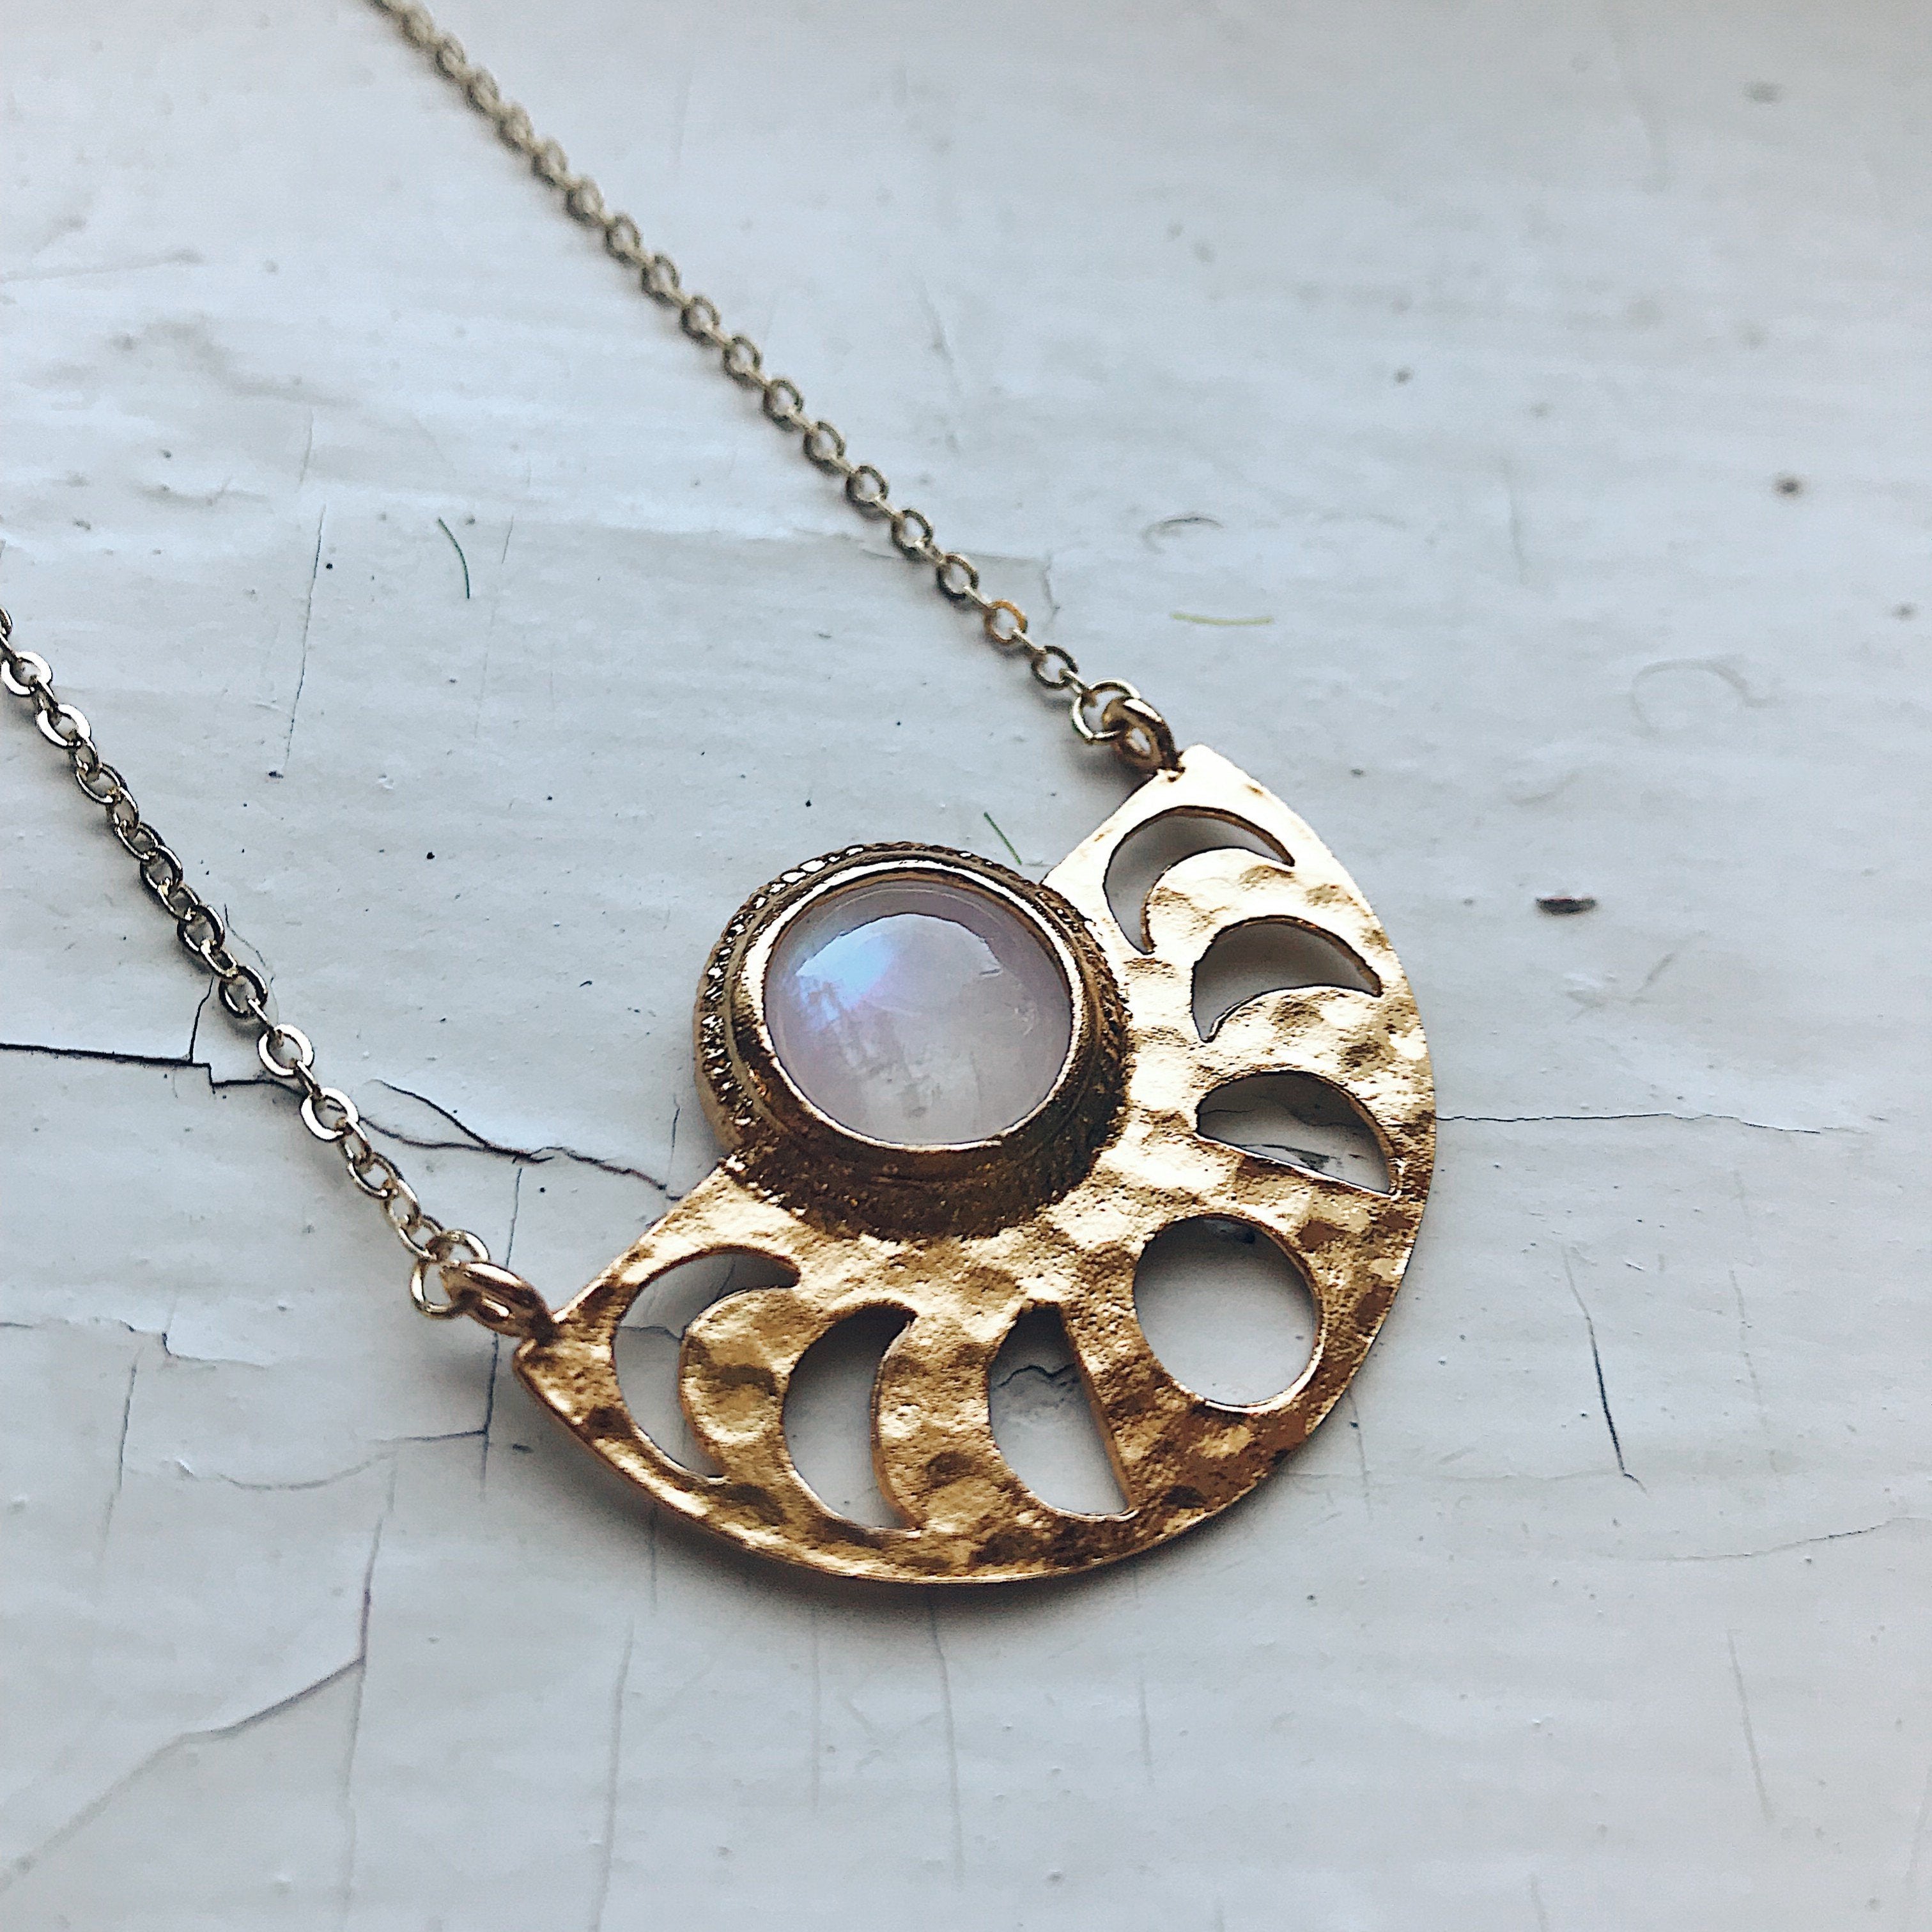 Moon Phases Rainbow Moonstone Pendant Necklace - Celebrate the Feminine Connection with Our Moon
Size & Materials: Pendant 1 1/2" x 1" (4.7cm x 3.2cm), Chain 16" (40 - Jewelry & Watches - Bijou Her -  -  - 